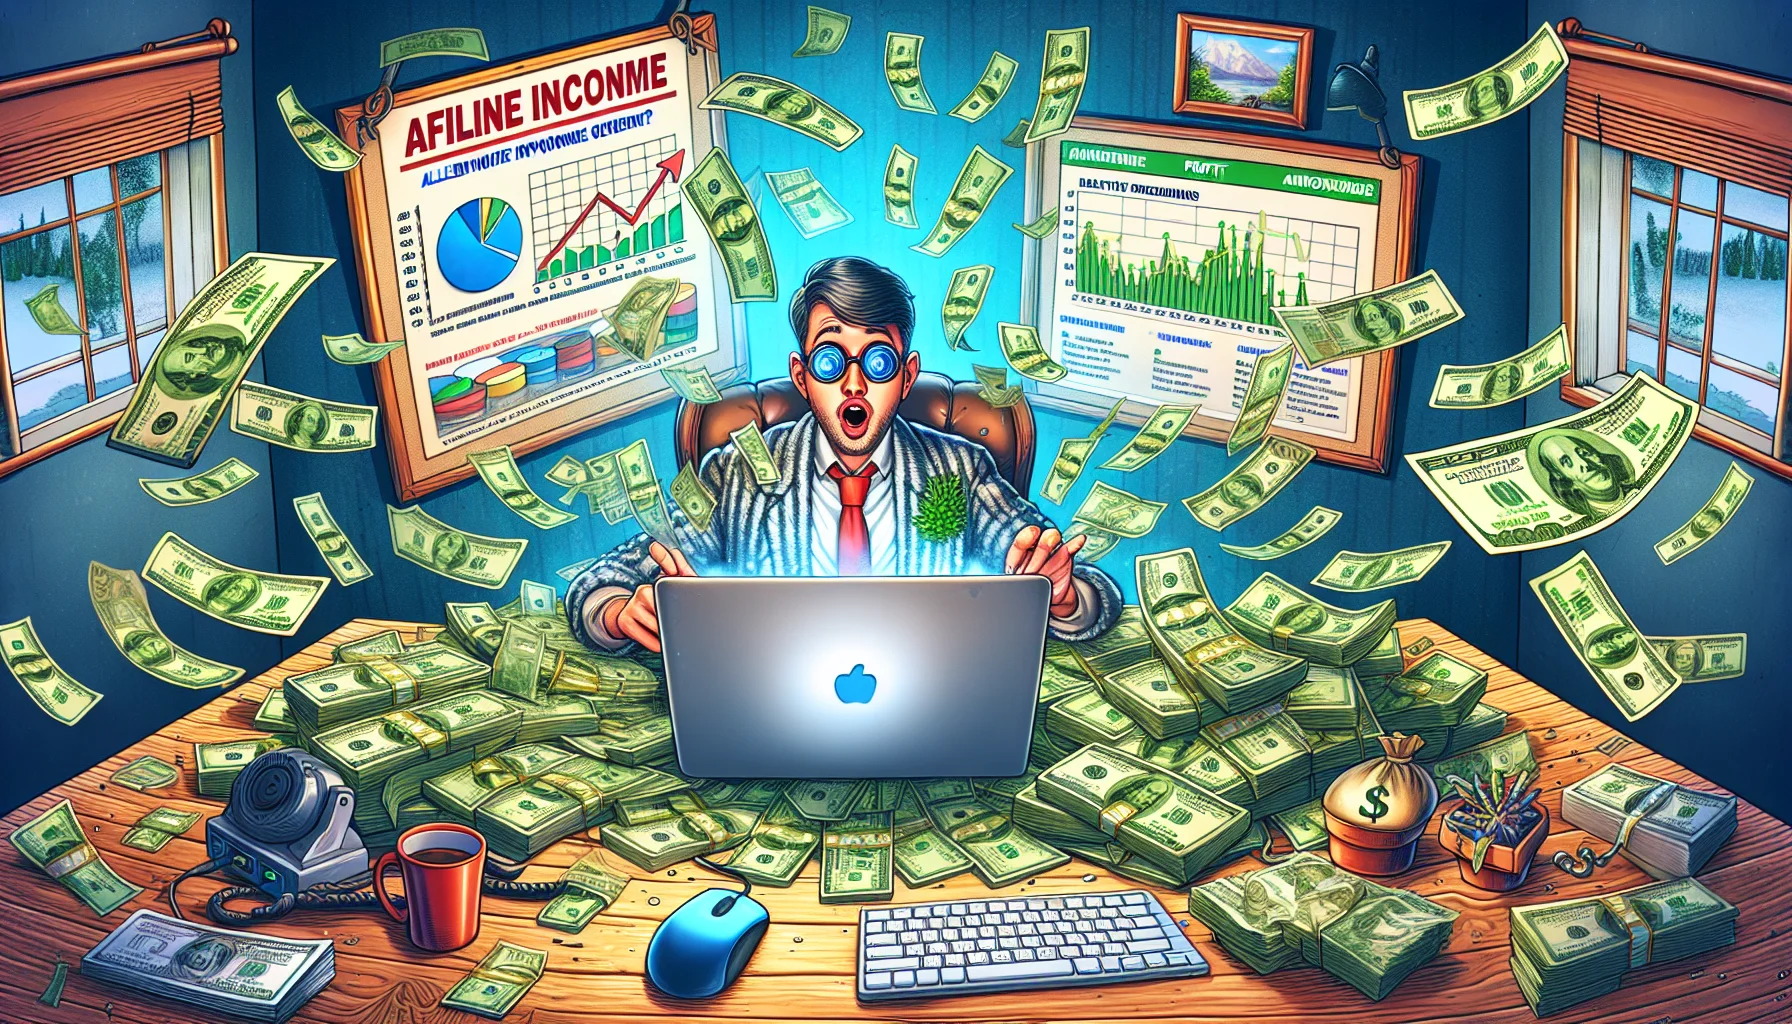 Imagine a humorous, true-to-life scene related to online income generation. An affiliate marketer of ambiguous descent is sitting at a home office overflowing with dollars notes, laptop open to a screen displaying healthy profit charts. The scene shares a blend of surrealism with a hearty touch of tropes seen in cartoons, ensuring the mood remains light and intriguing. The marketer who is also of ambiguous gender, wears a comic expression communicating their astonishment and joy at the money literally flooding out of the computer screen. Don't forget to include little details such as the mouse, keyboard, and coffee mug, to add a dash of realism.